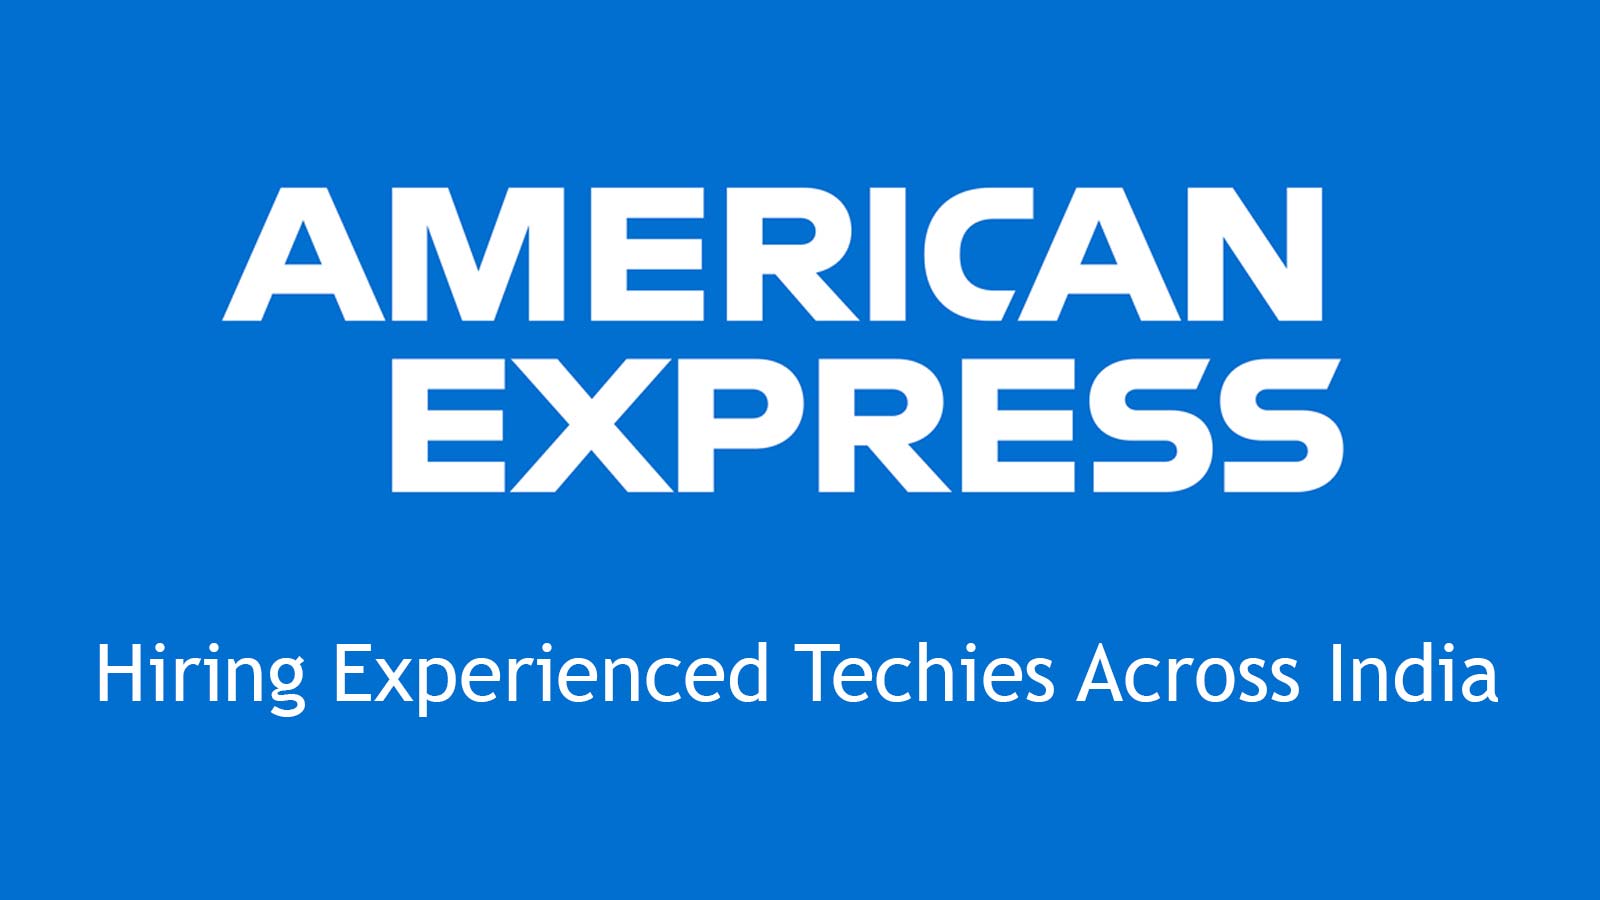 American Express is Hiring Experienced Techies Across India | Apply Now